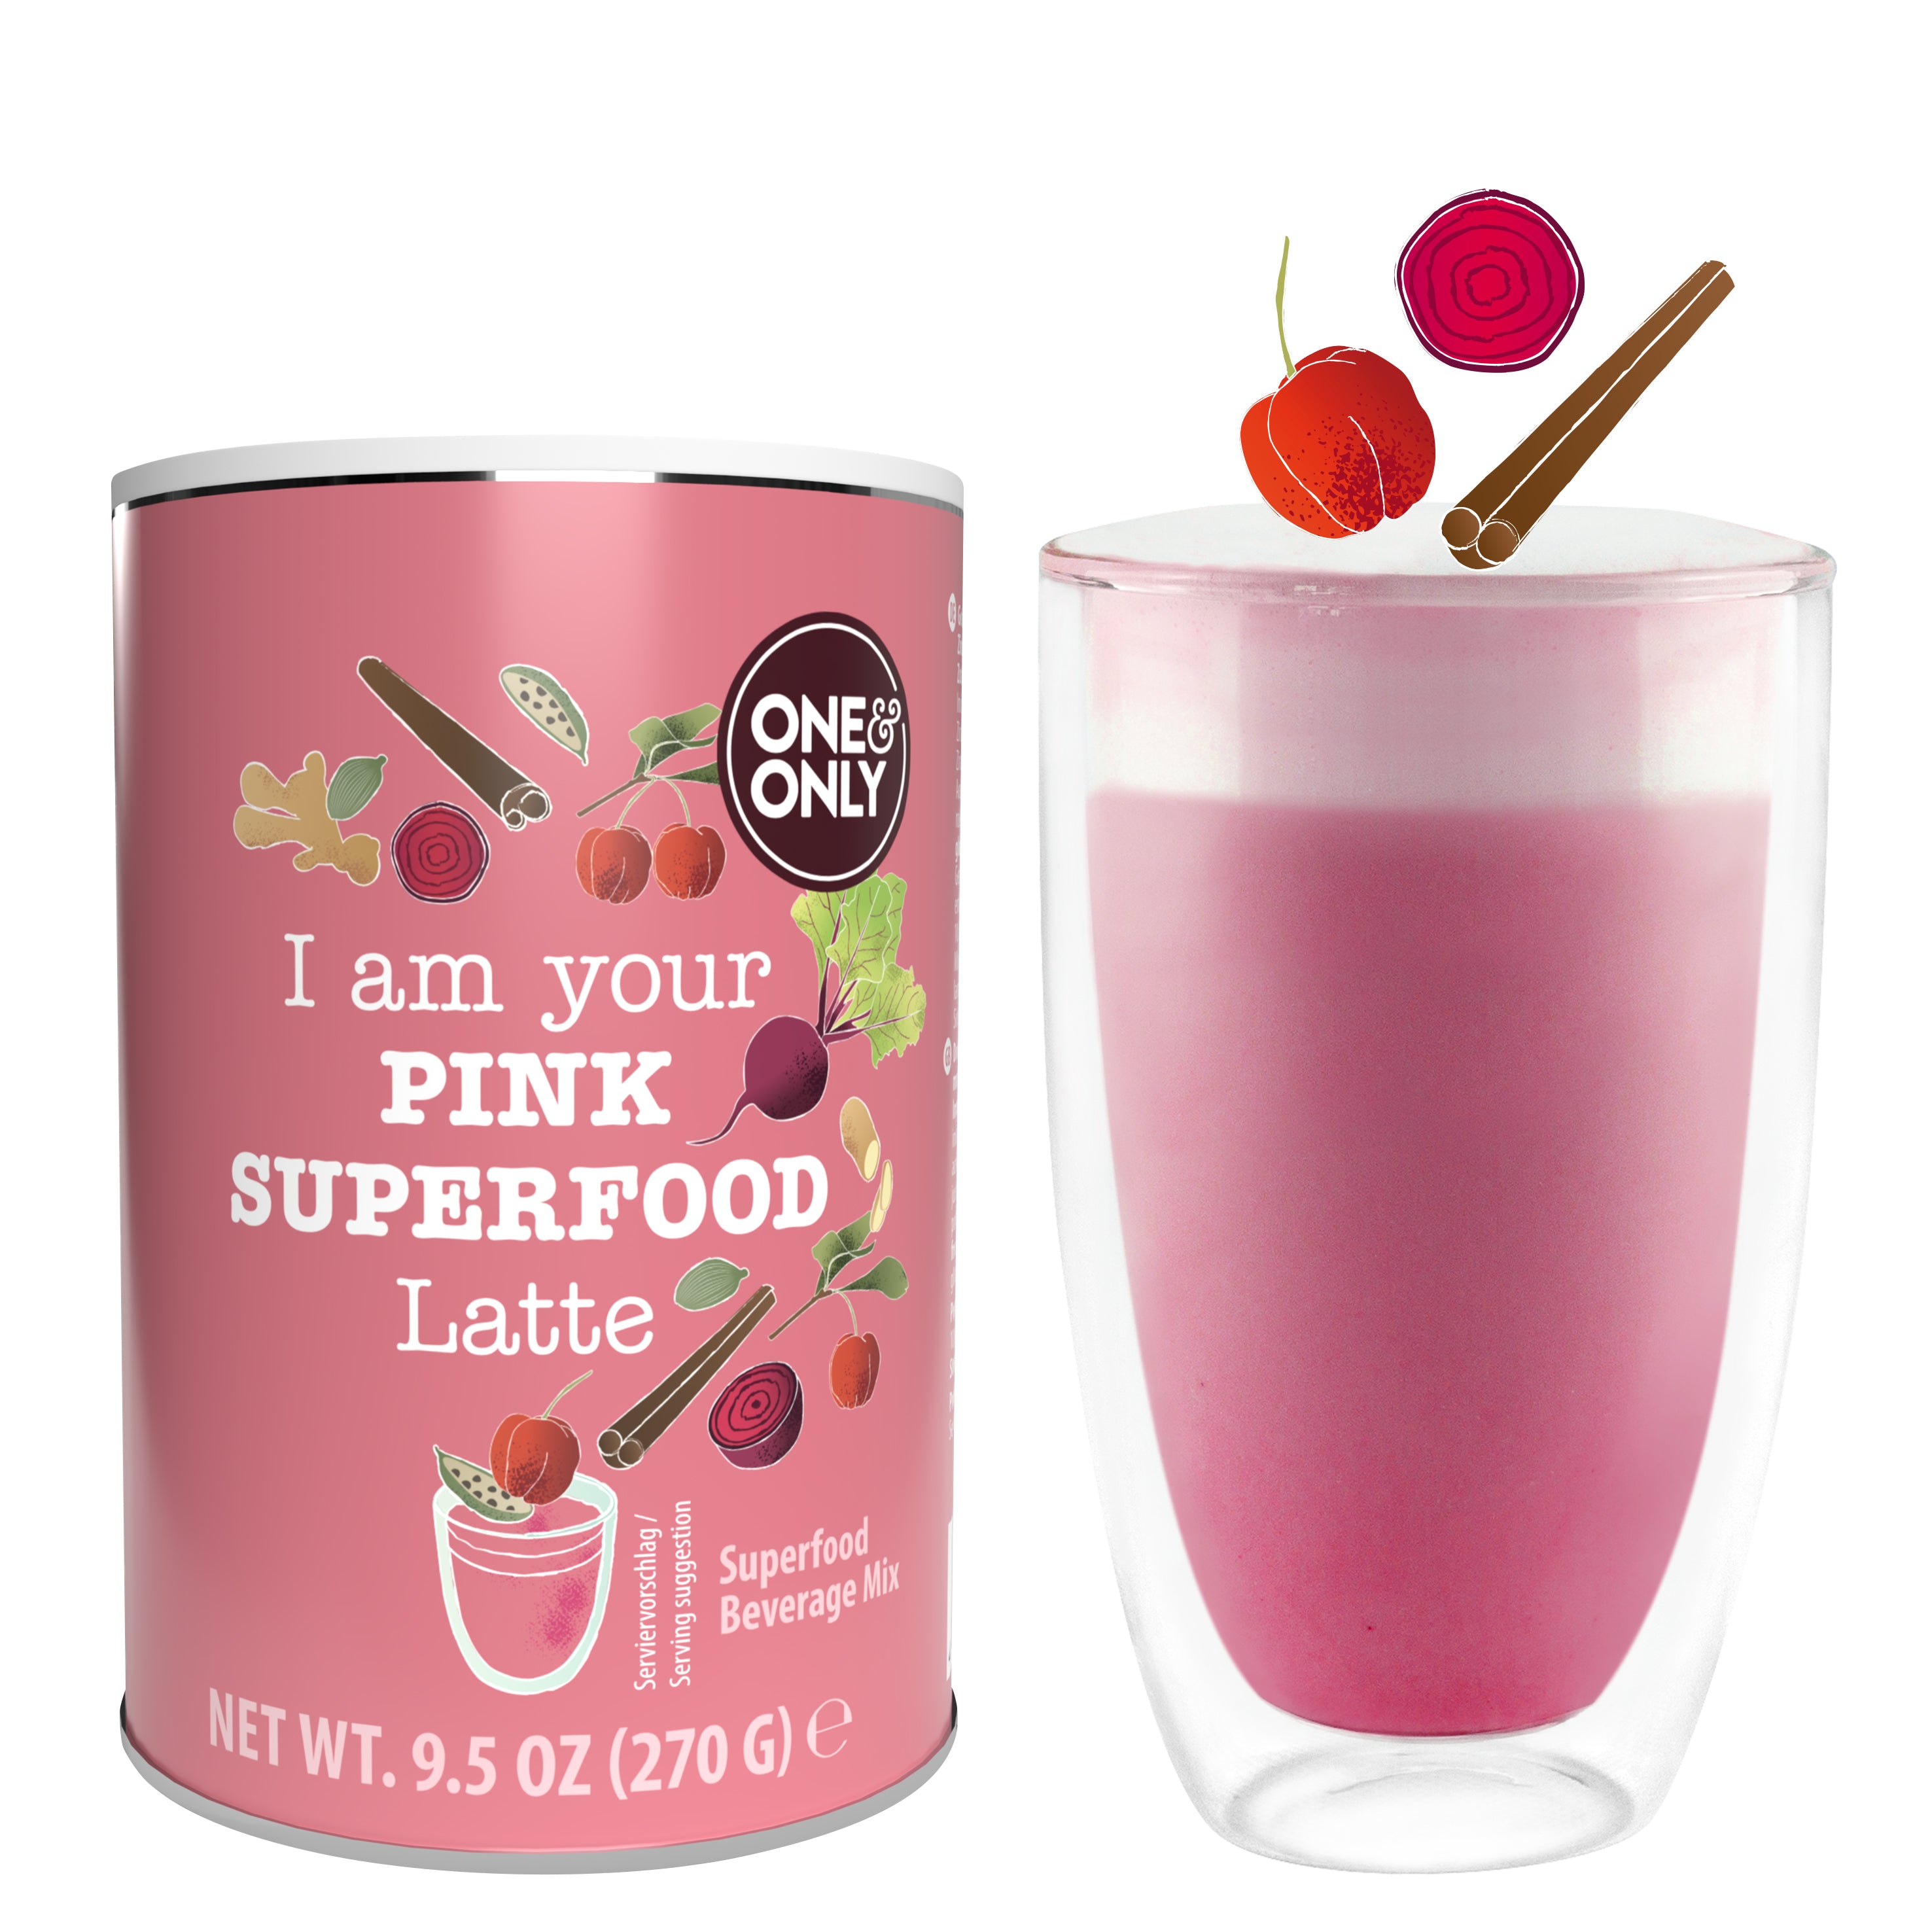 ONE&ONLY Pink Superfood Latte